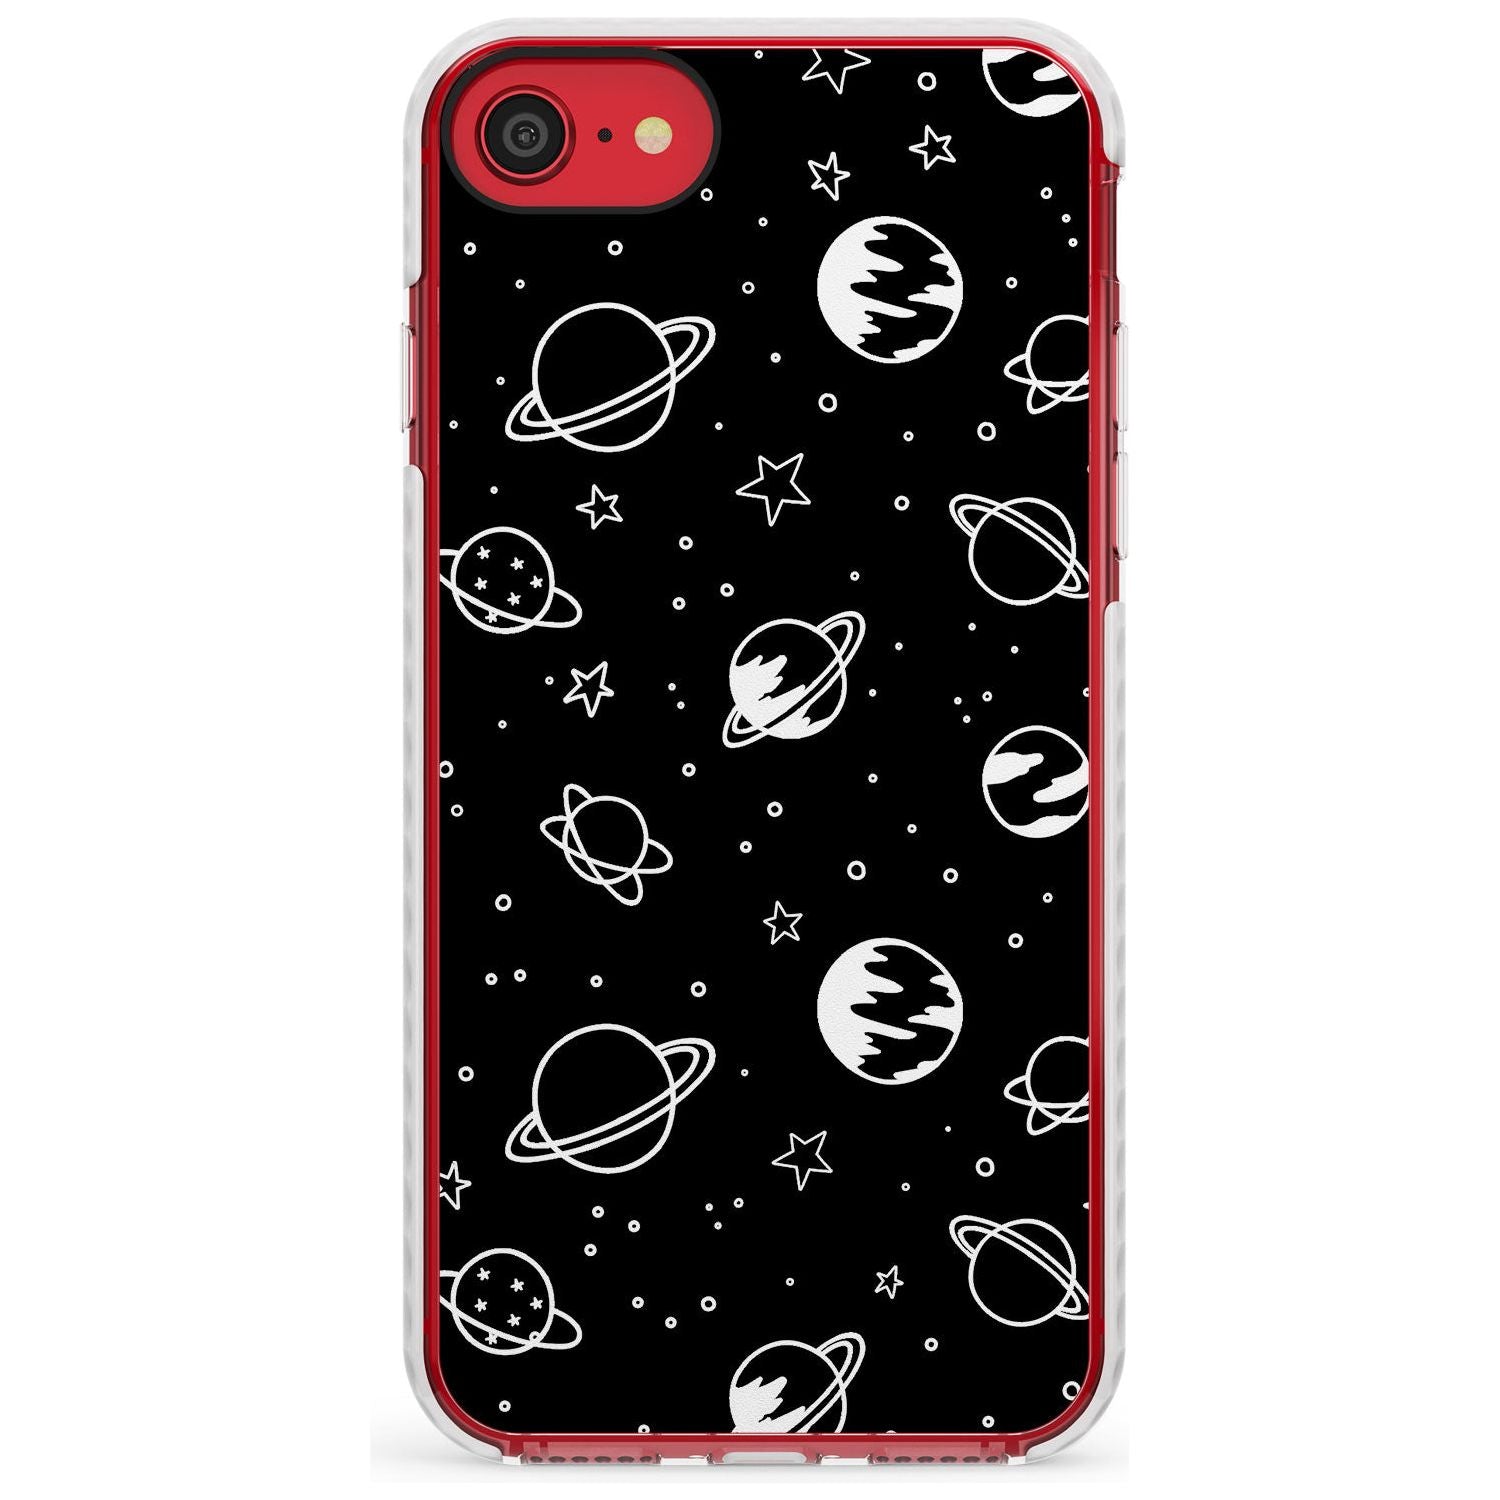 Outer Space Outlines: White on Black Slim TPU Phone Case for iPhone SE 8 7 Plus